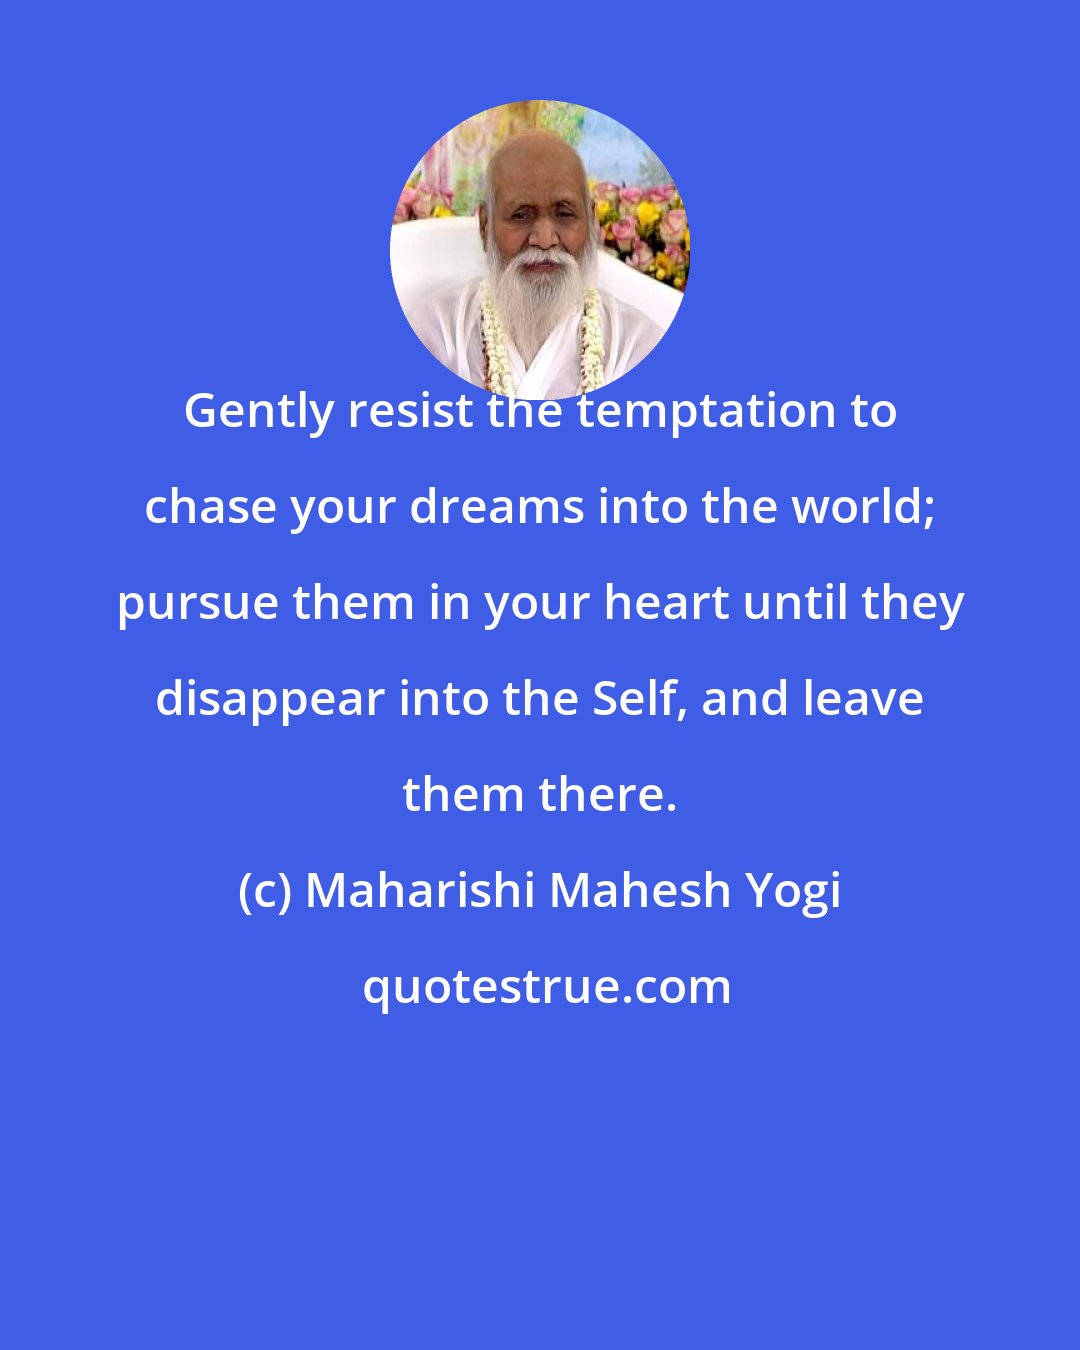 Maharishi Mahesh Yogi: Gently resist the temptation to chase your dreams into the world; pursue them in your heart until they disappear into the Self, and leave them there.